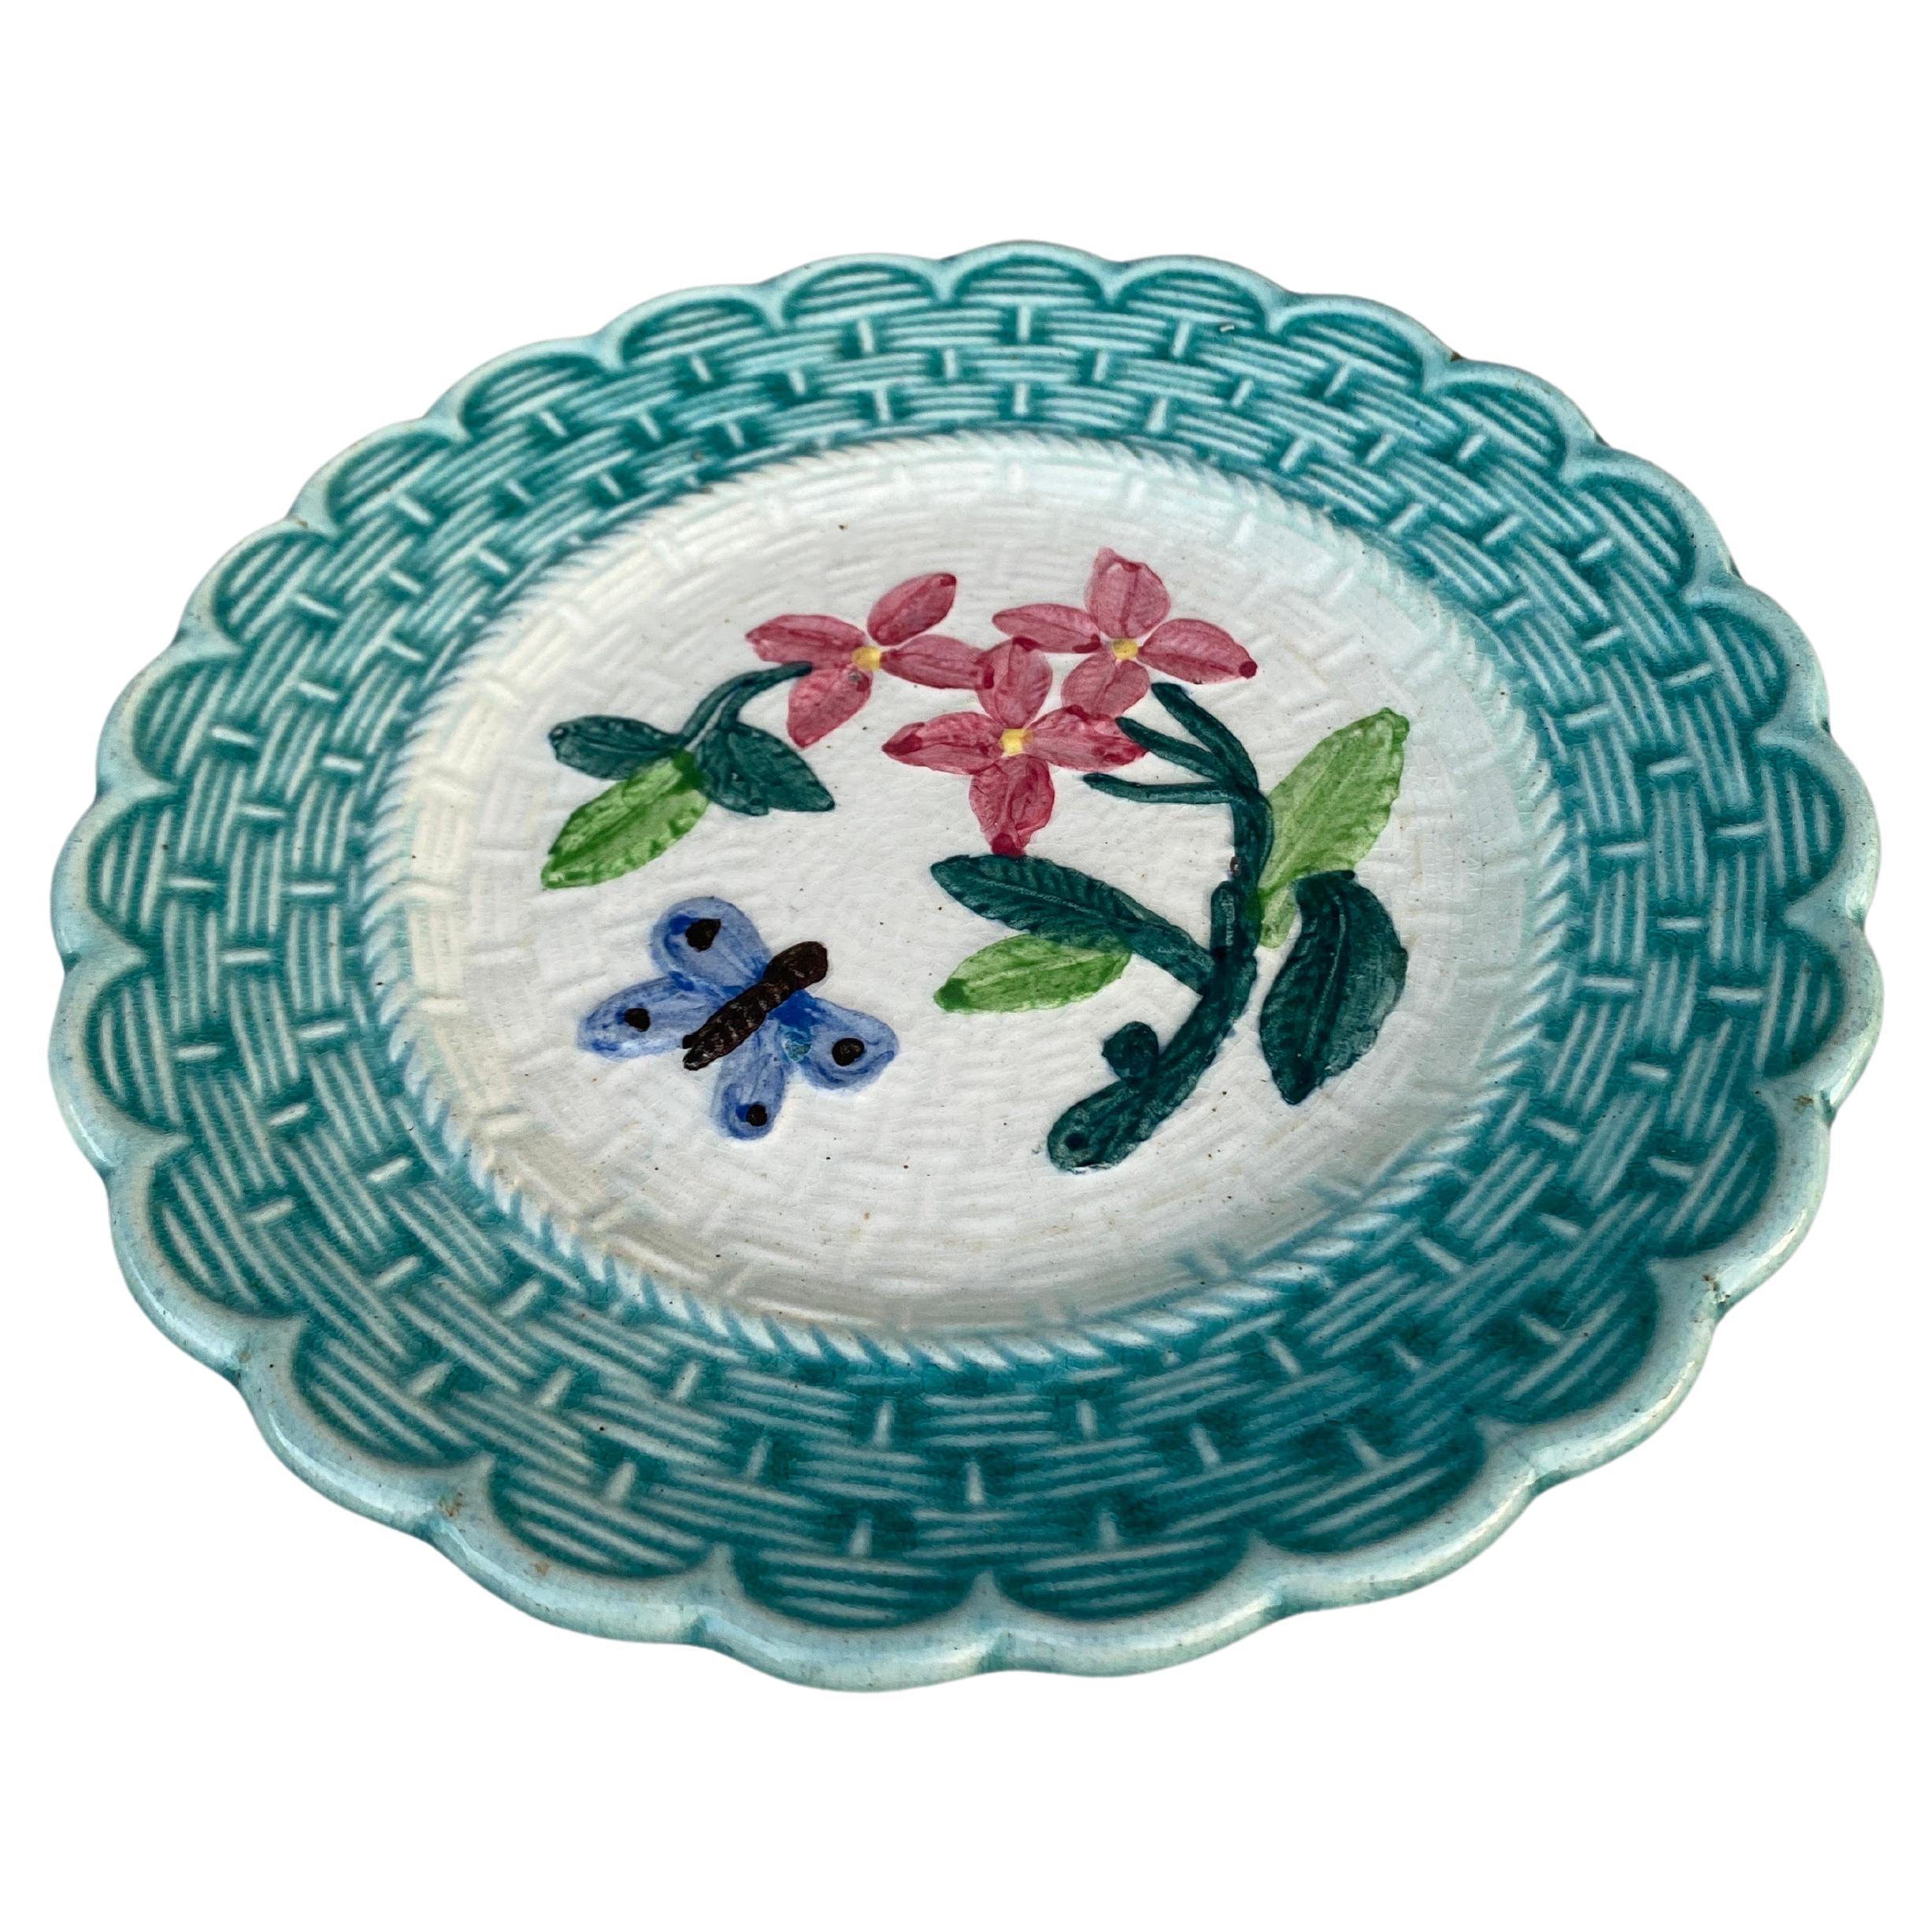 French majolica plate with flowers & butterfly, Circa 1900.